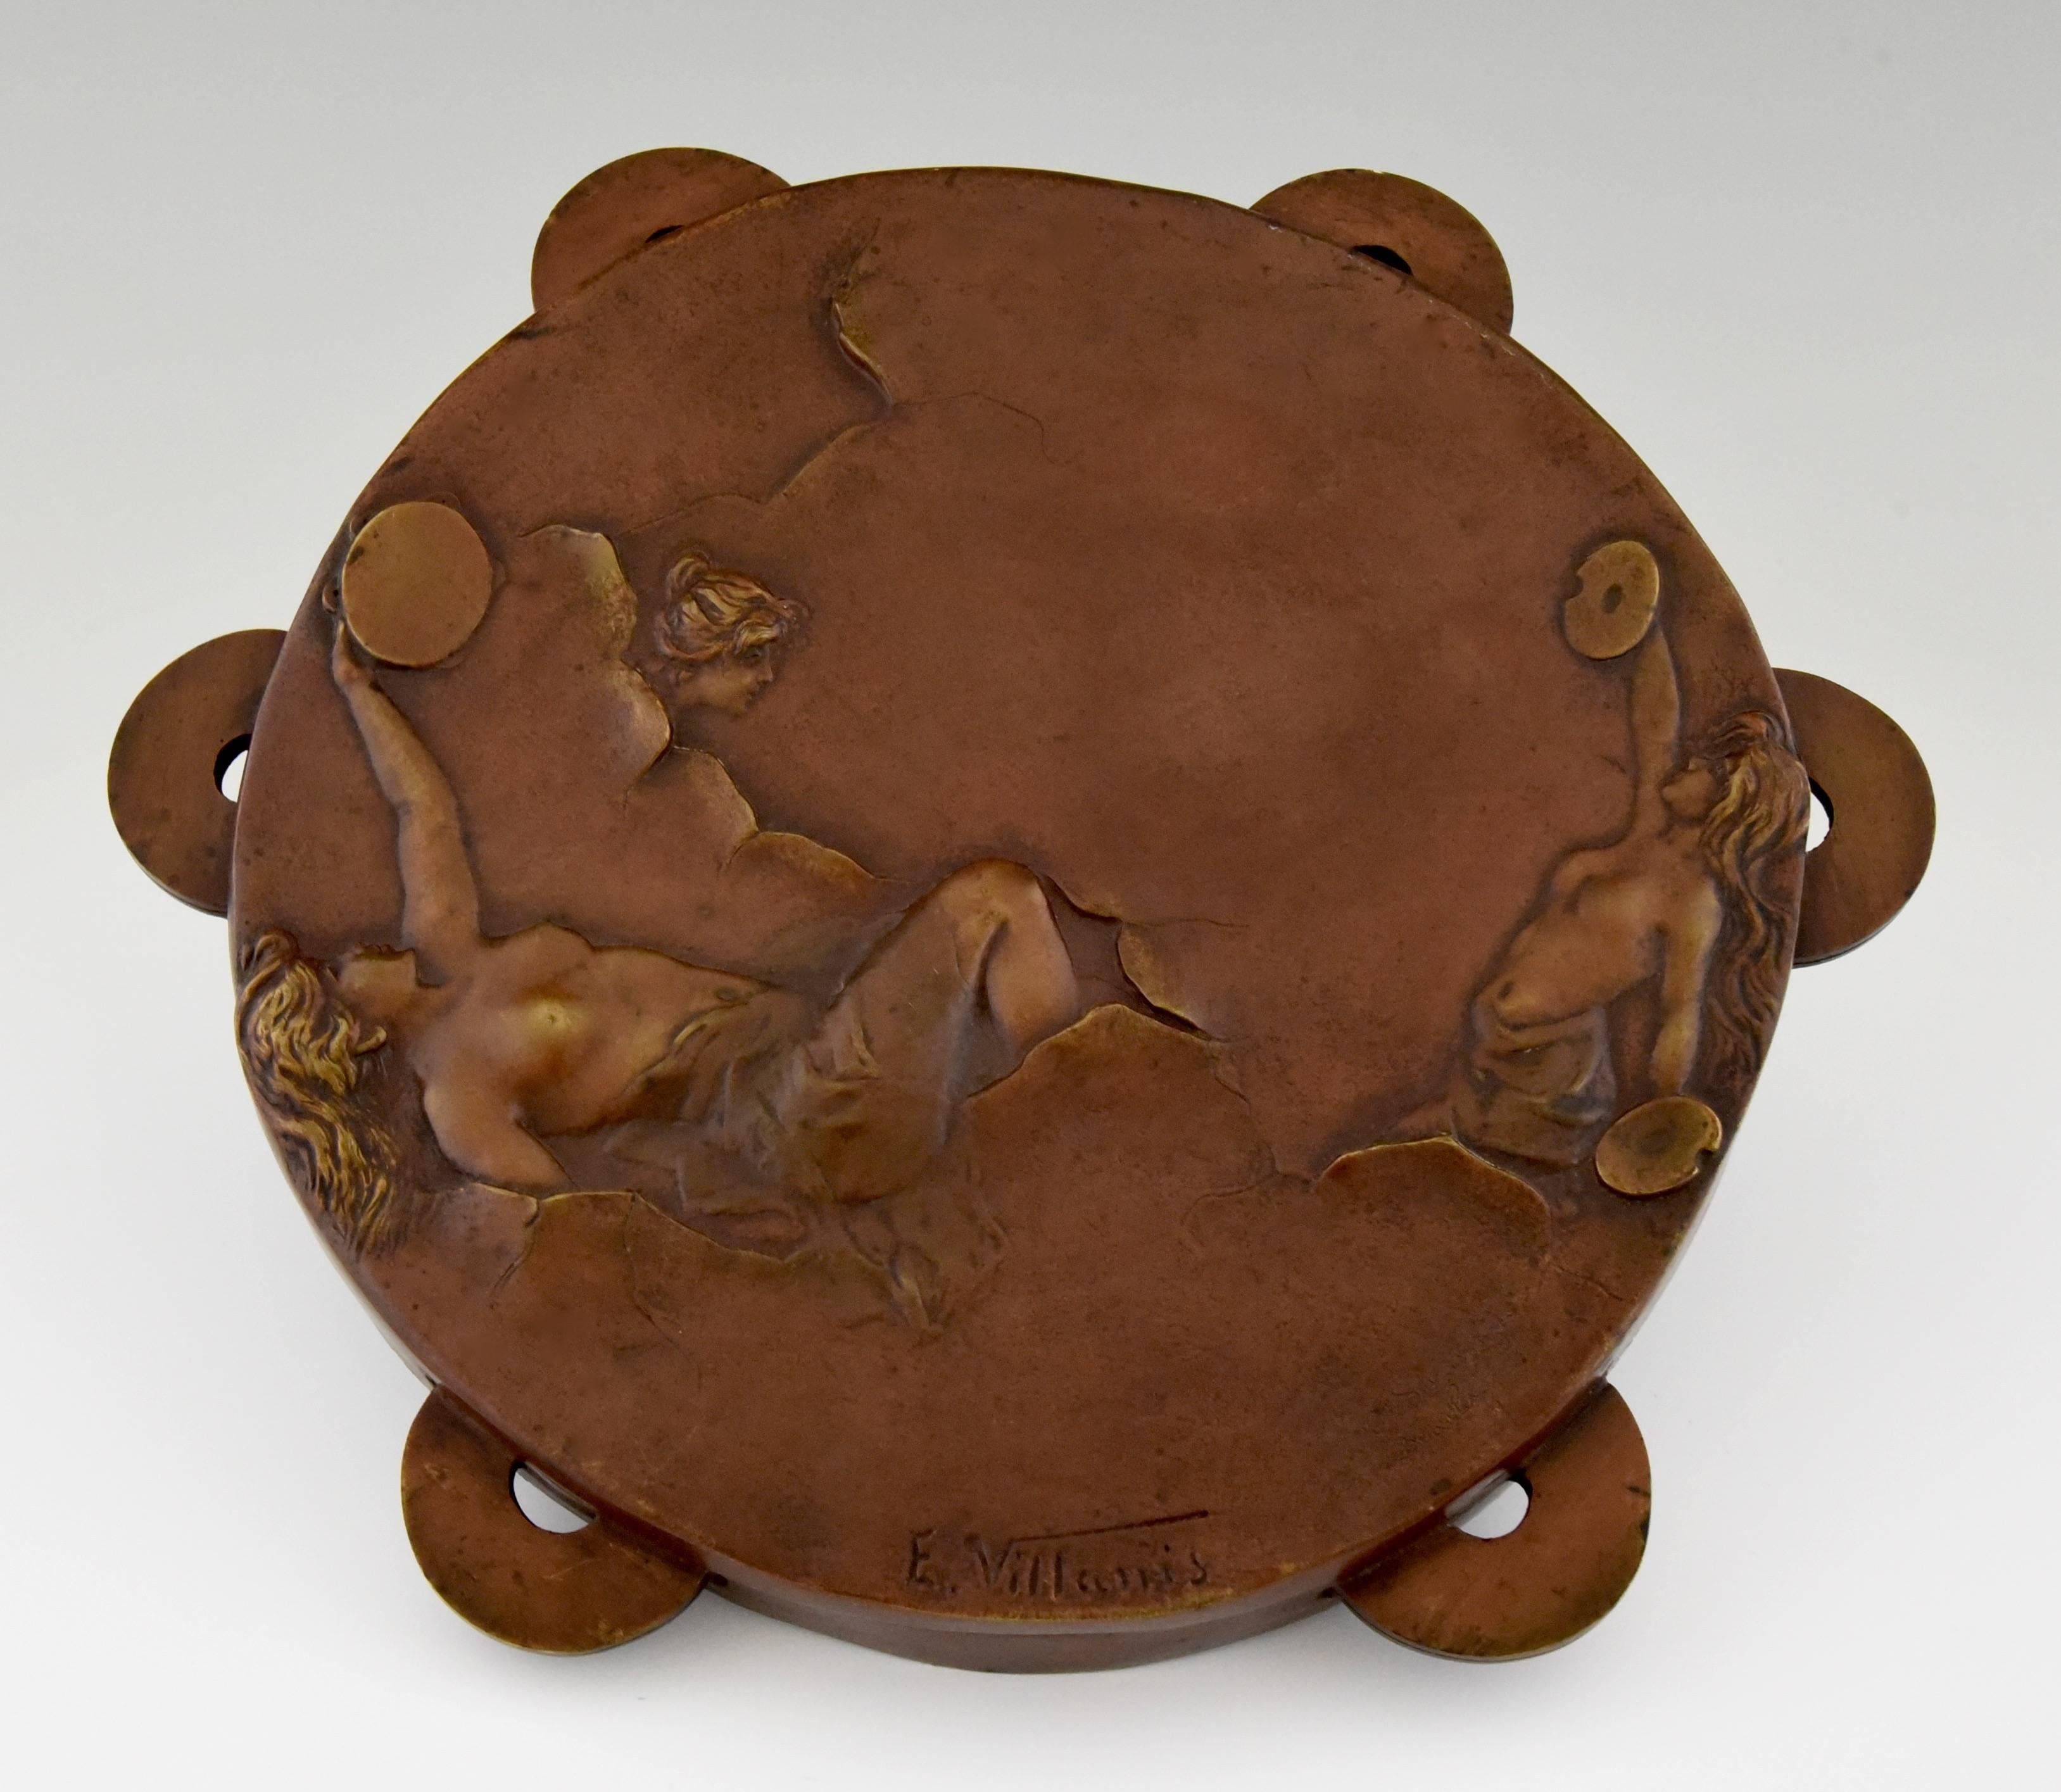 Bronze tambourine decorated with nudes playing cymbals and tambourine. 

Literature:
“Emmanuel Villanis, un sculpteur art nouveau” by Pascal Launay. Thélès. 
Illustration of this model on page 124.